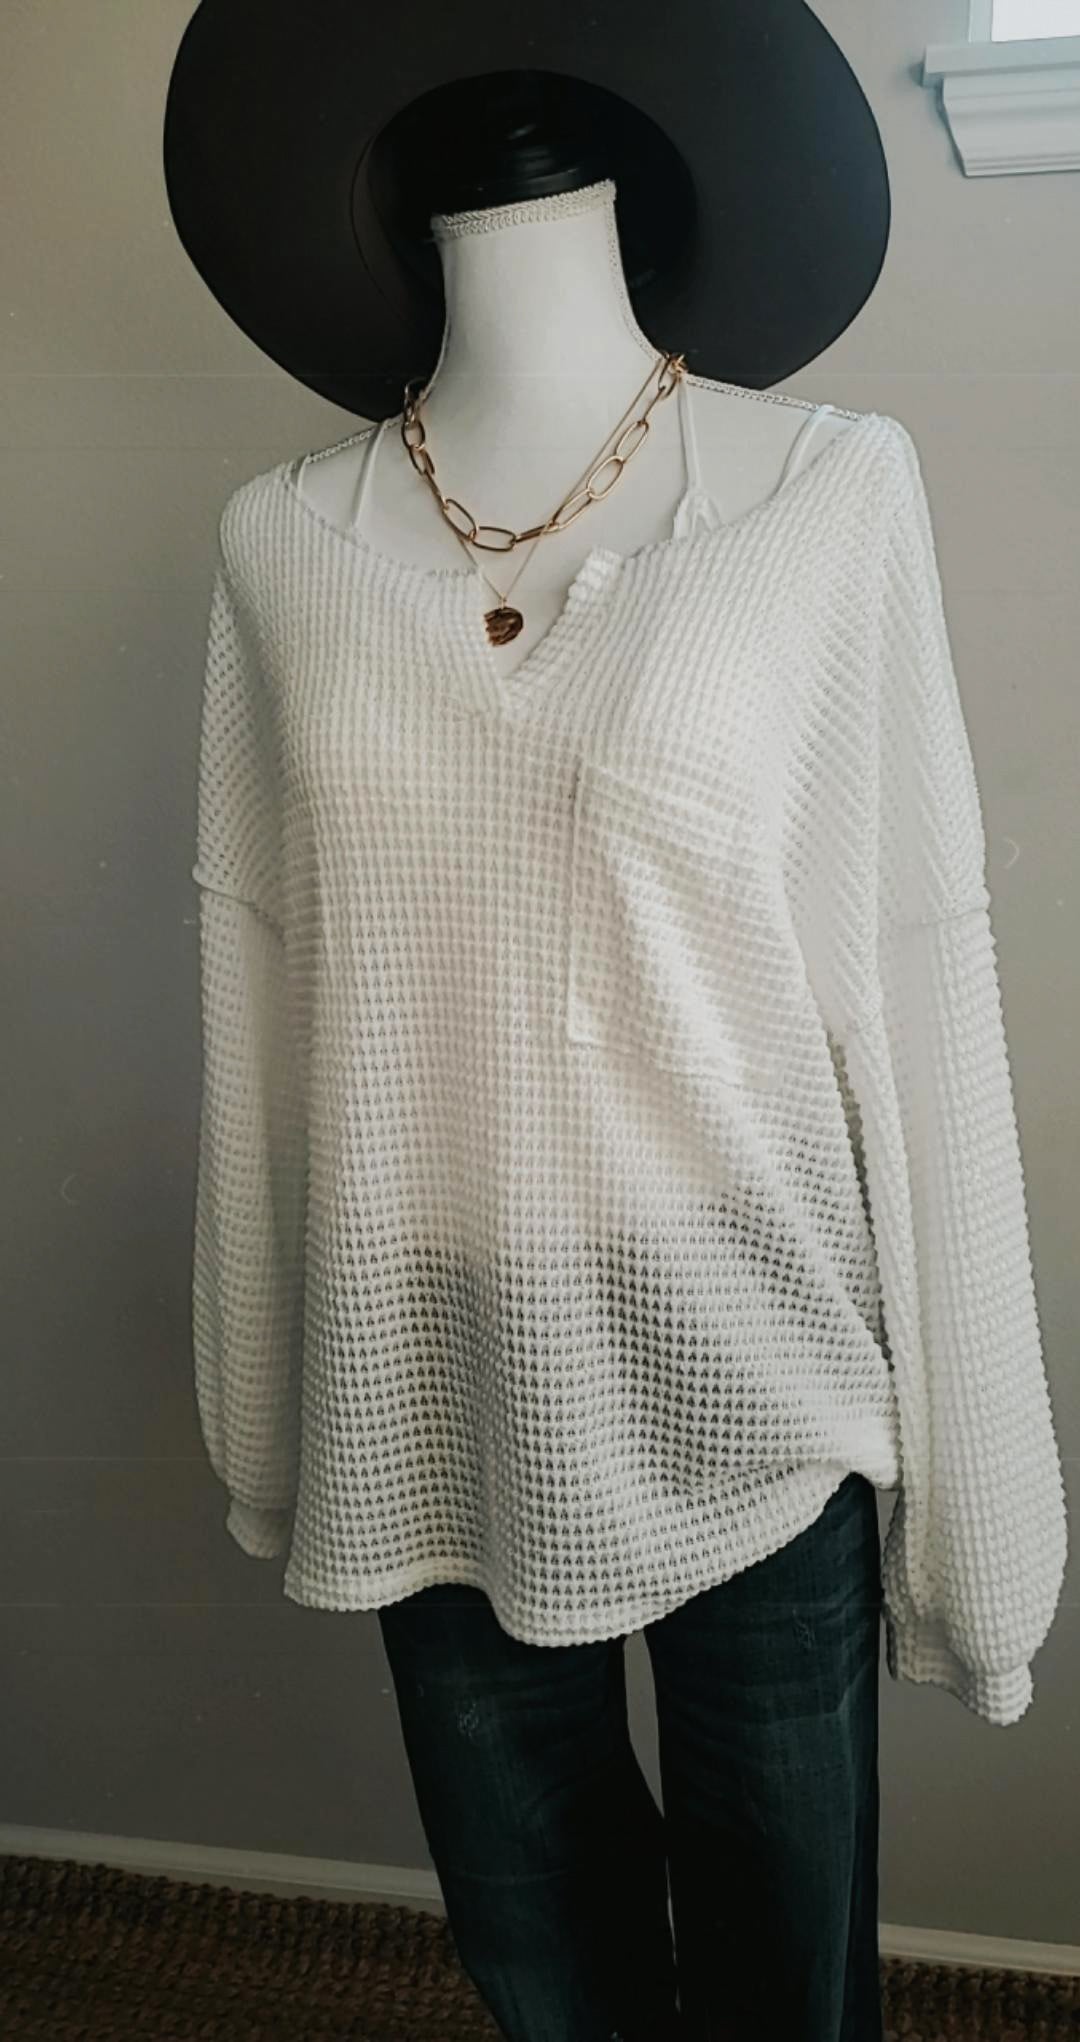 OVERSIZED WAFFLE KNIT TOP WITH BUBBLE SLEEVES AND FRONT PATCH POCKET